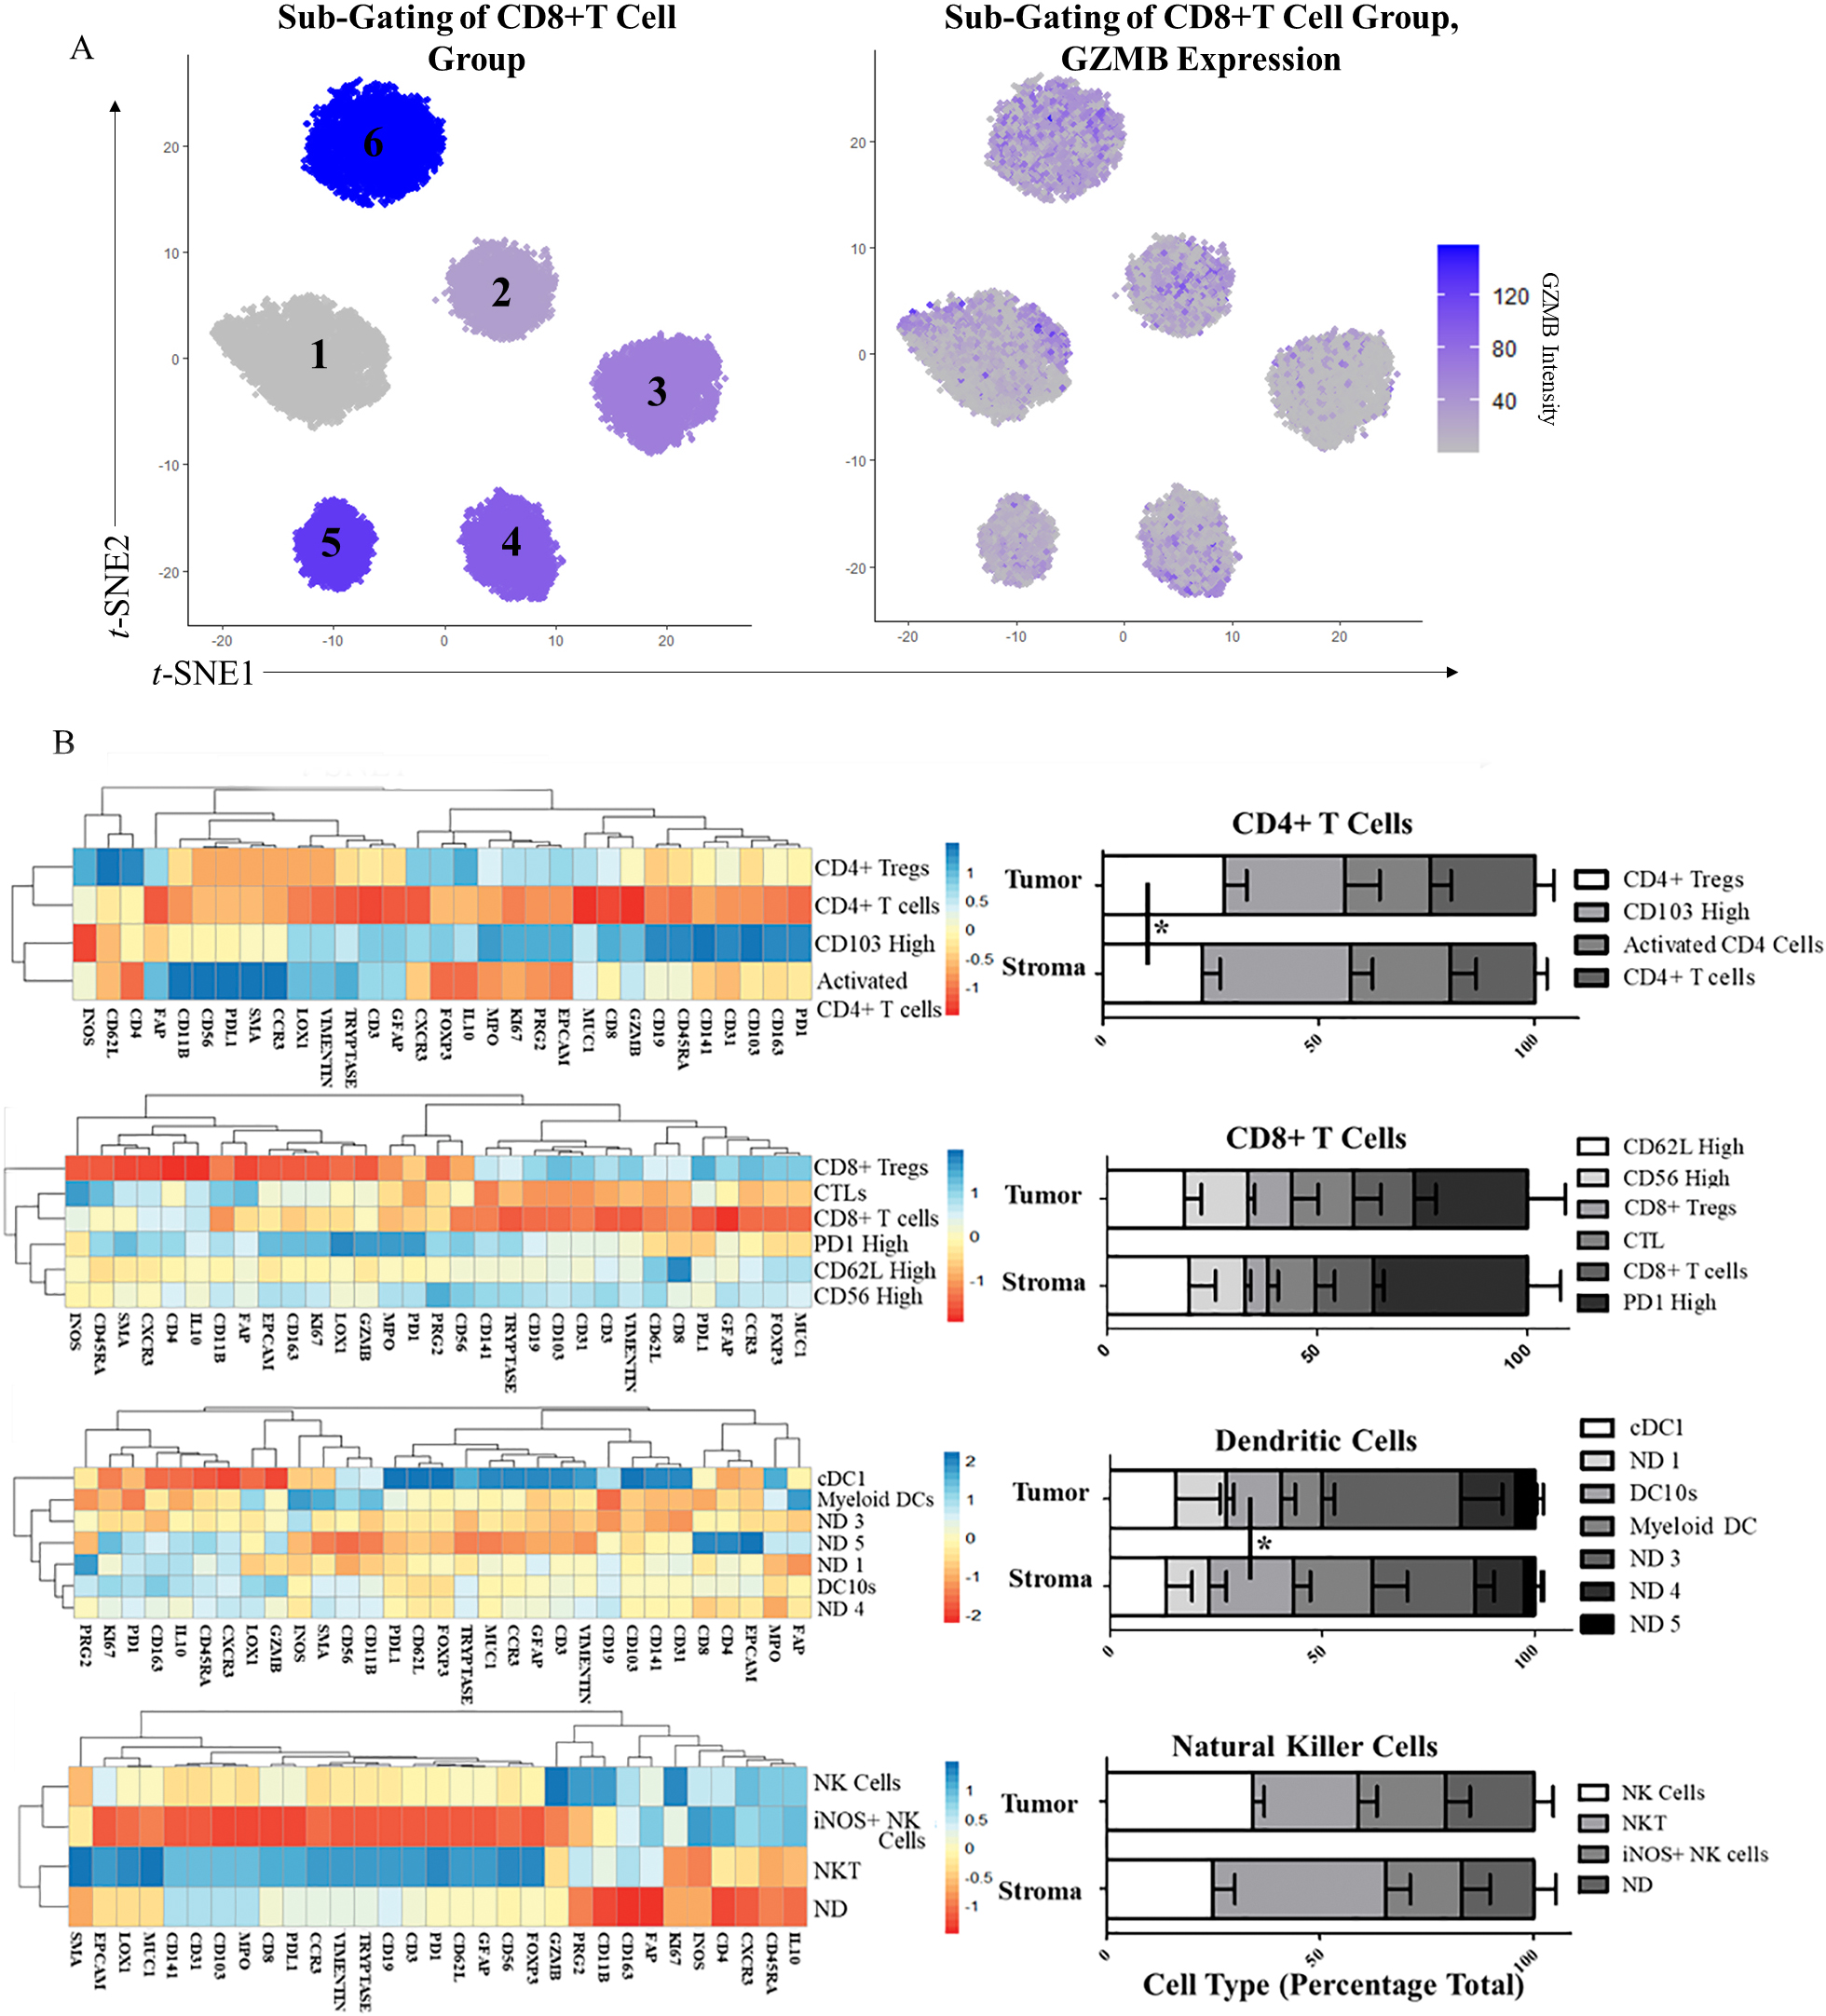 Sub-Gating of CD4+ and CD8+ T Cells, DCs, and NK cells. A) CD8+ T cell sub-gating using Louvain clustering (t-SNE plot) and GZMB distribution in CD8+ T cells (feature plot). B) Heatmaps of average marker expression in CD4+ T cells, CD8+ T cells, DC 2, and NK 2 cells. C) Stacked bar plot of CD4+ T cell, CD8+ T cell, DC 2, and NK 2 cell sub-gated cell groups in tumor and stroma regions in all patients. * =p< 0.05.